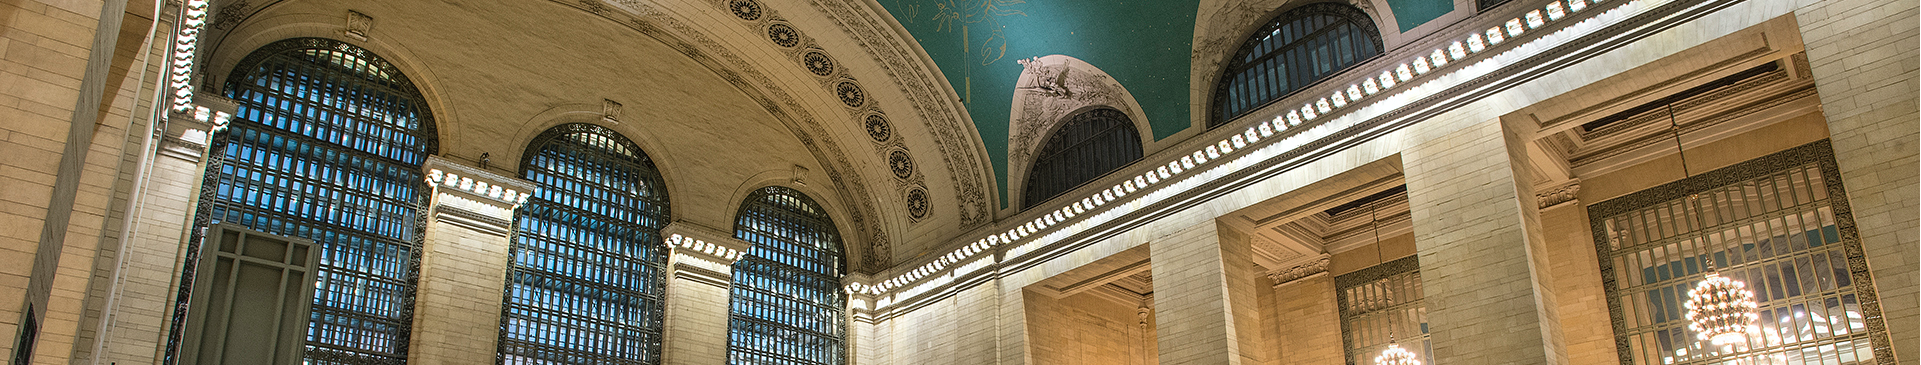 The vaulted ceiling, grand windows, and archways of Grand Central Terminal’s main hall.